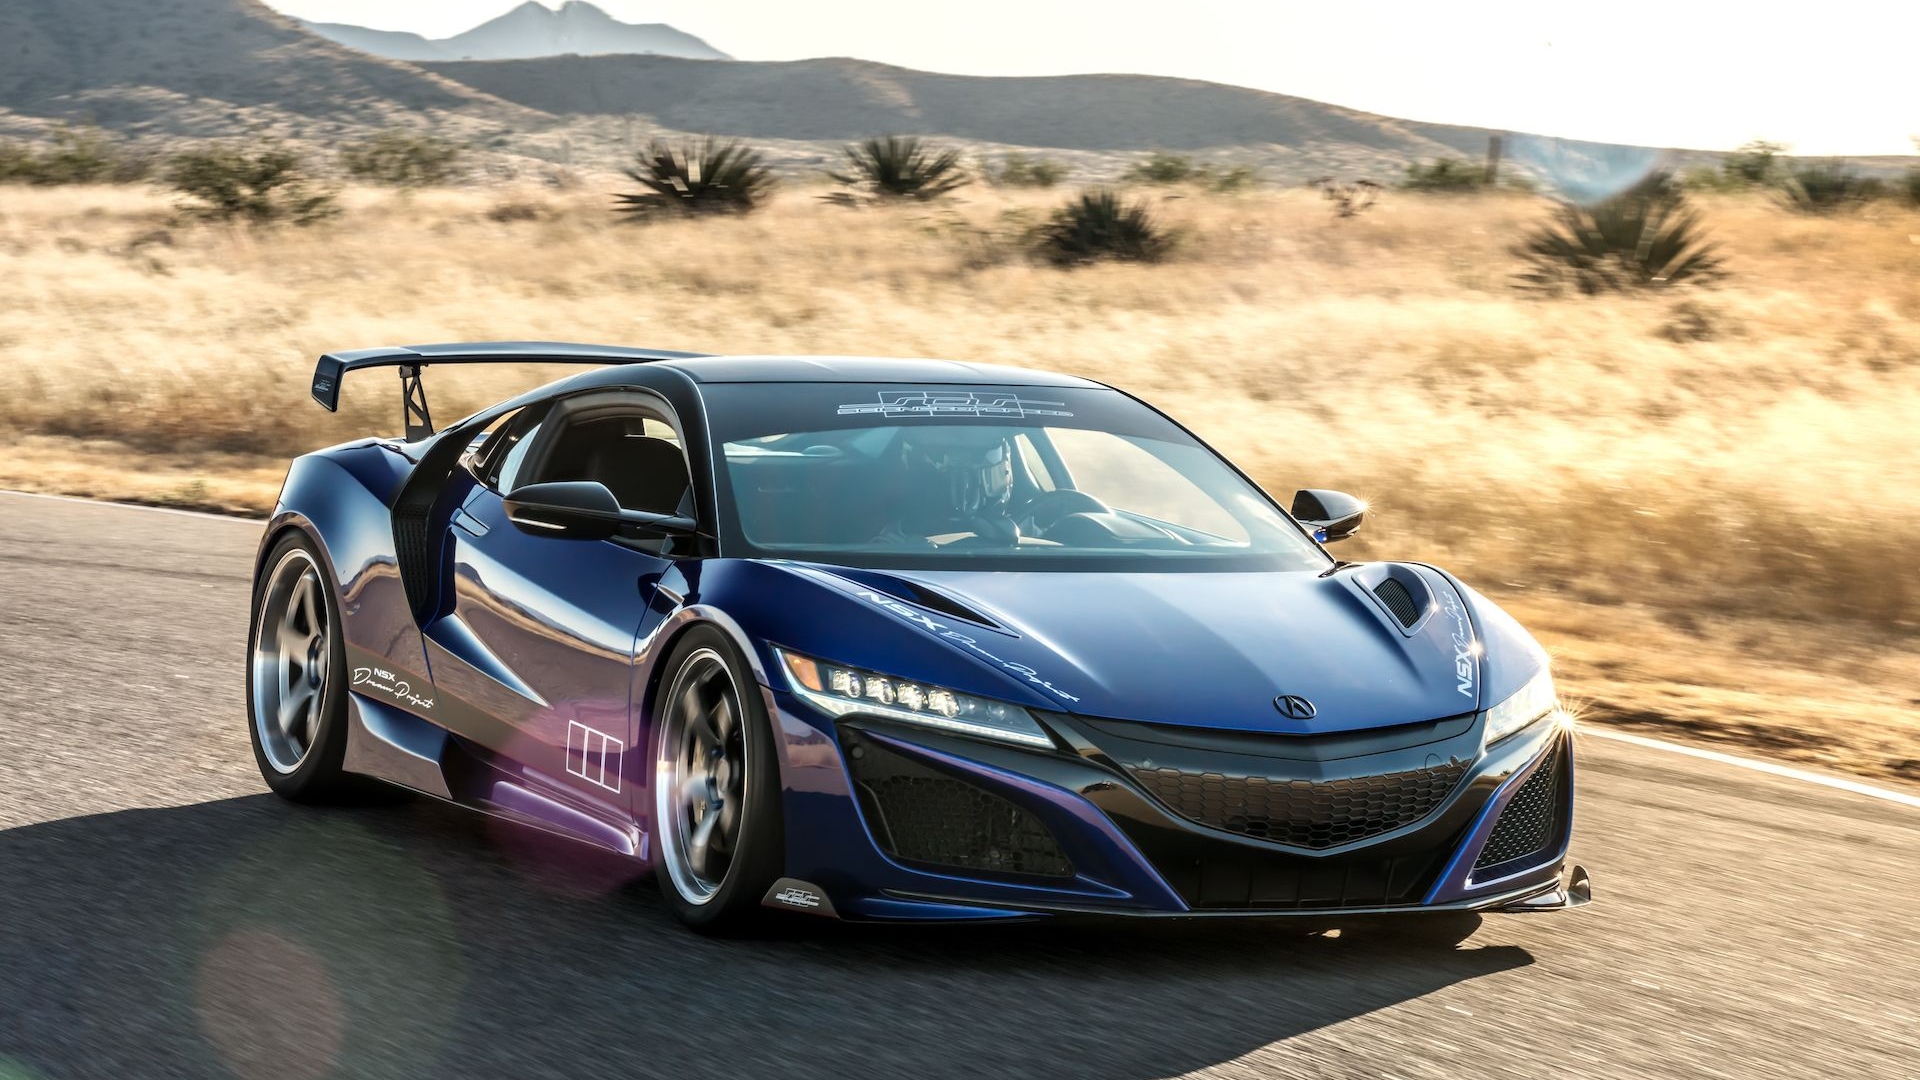 Science of Speed custom Acura NSX debuted at 2017 SEMA show 